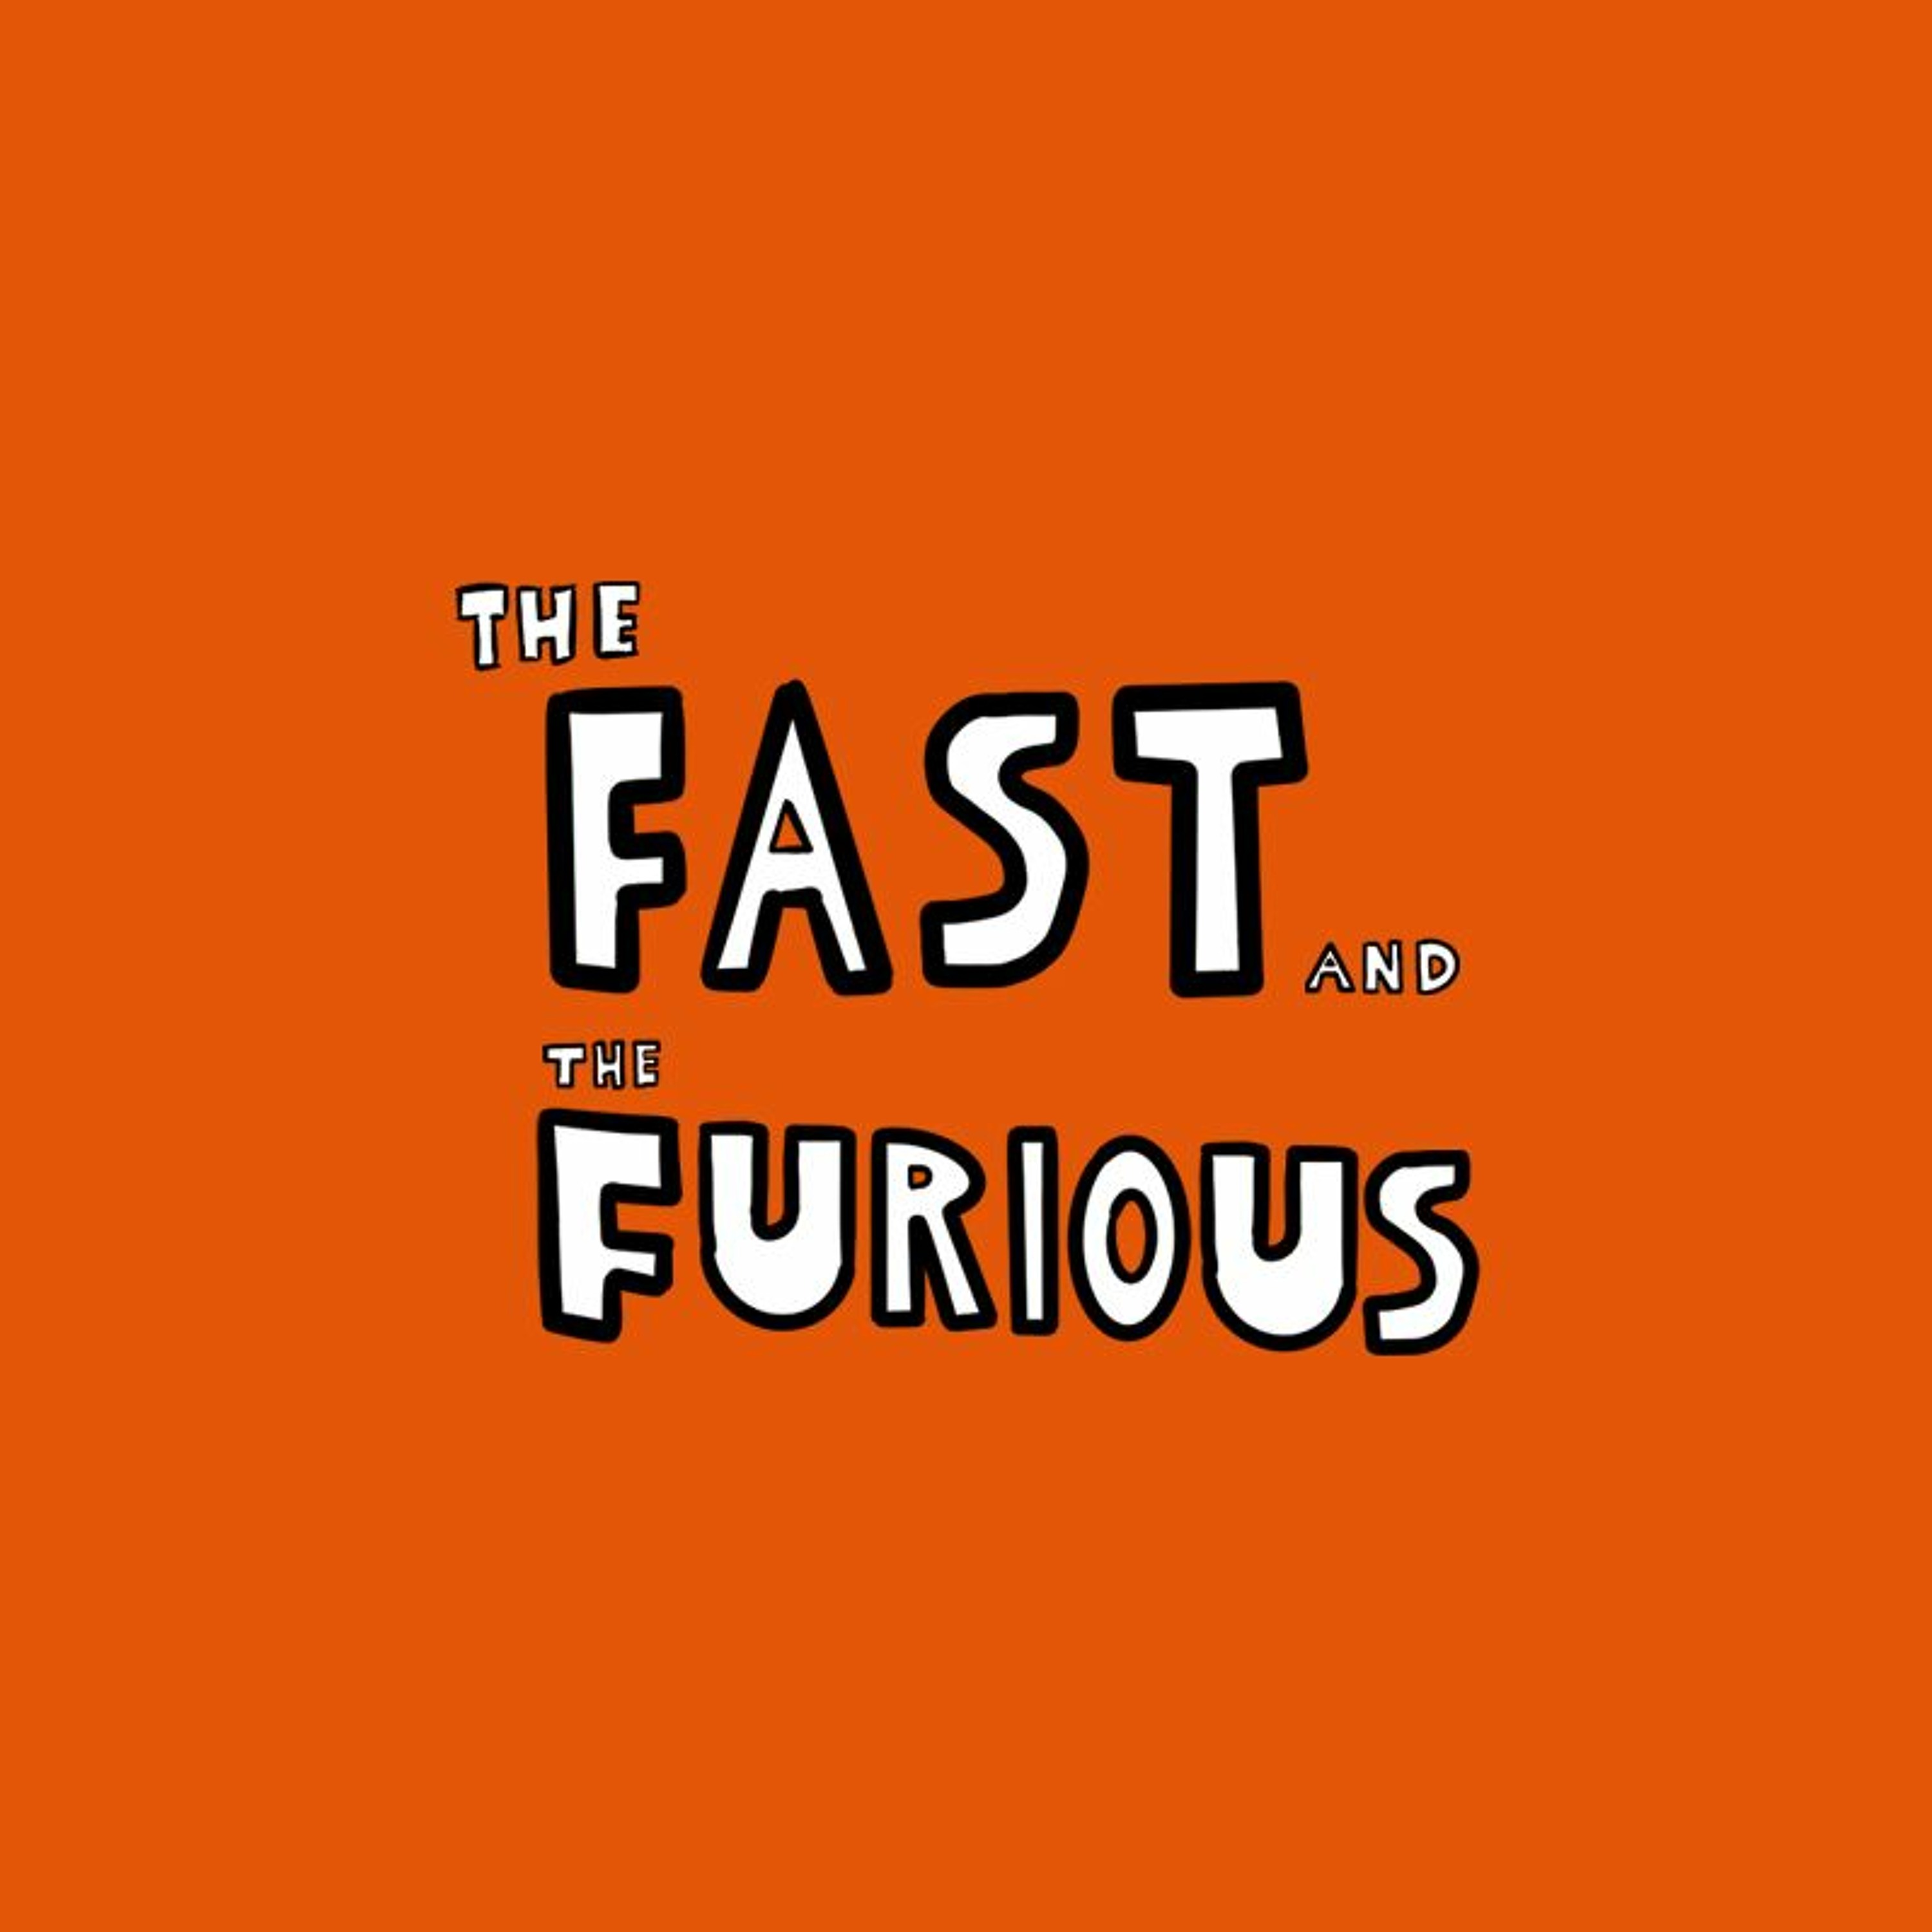 'THE FAST AND THE FURIOUS' | HYPER FUTURE SHOW